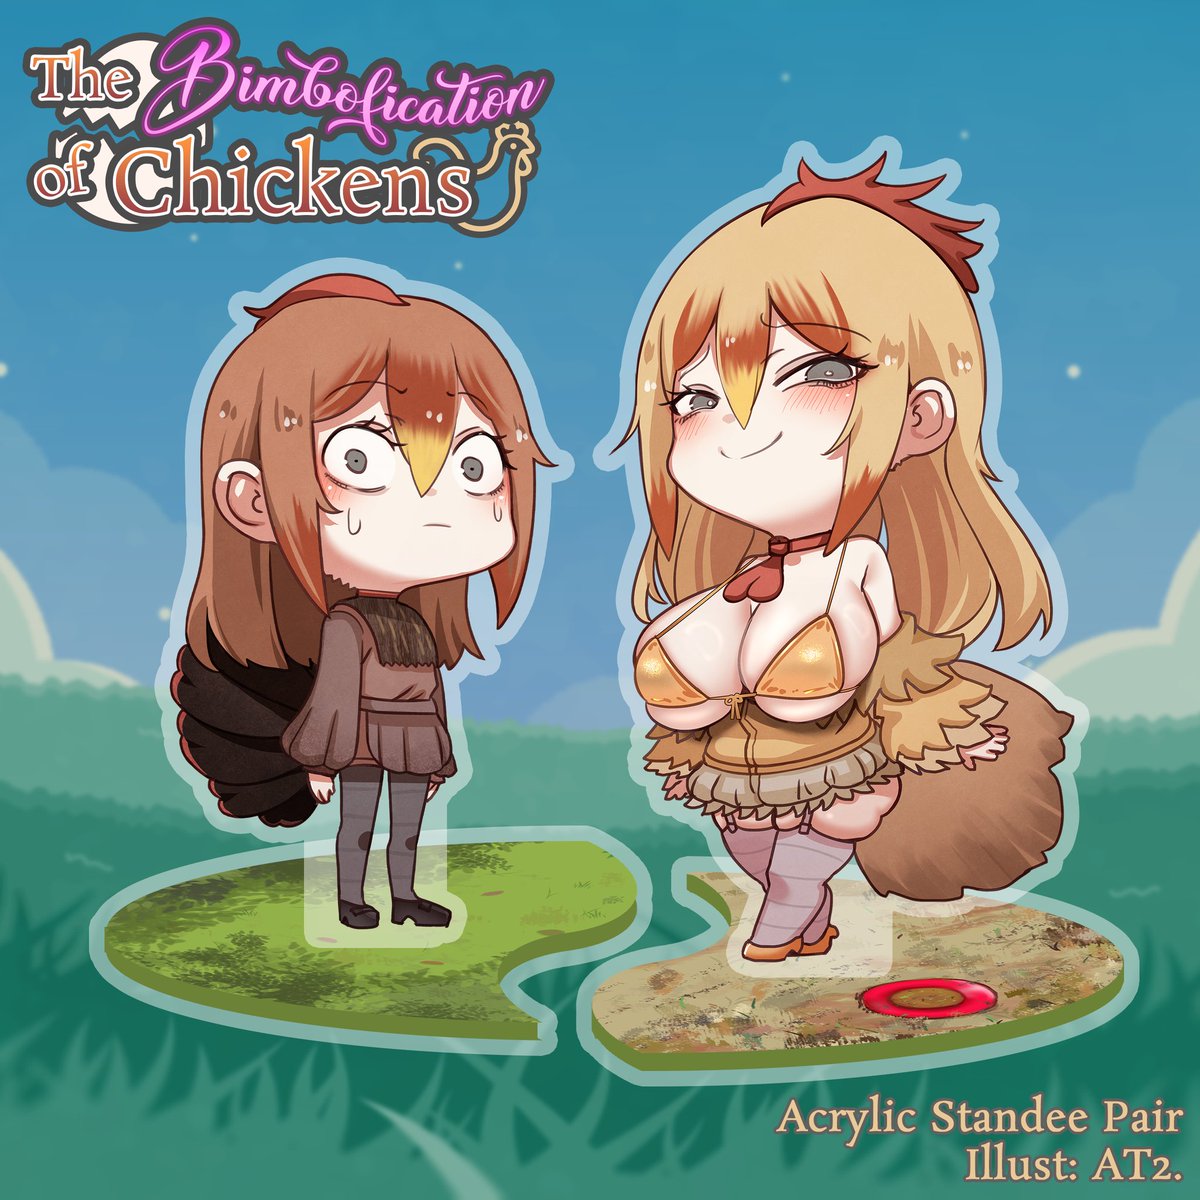 You can now enjoy the Bimbofication of Chickens at home, with our brand new acrylic stands!! 🐔✨️ merch.kawaentertainment.com/collections/mwm Use them as a conversation starter about how much the human race has genetically altered livestock through the use of selective breeding! 🤩